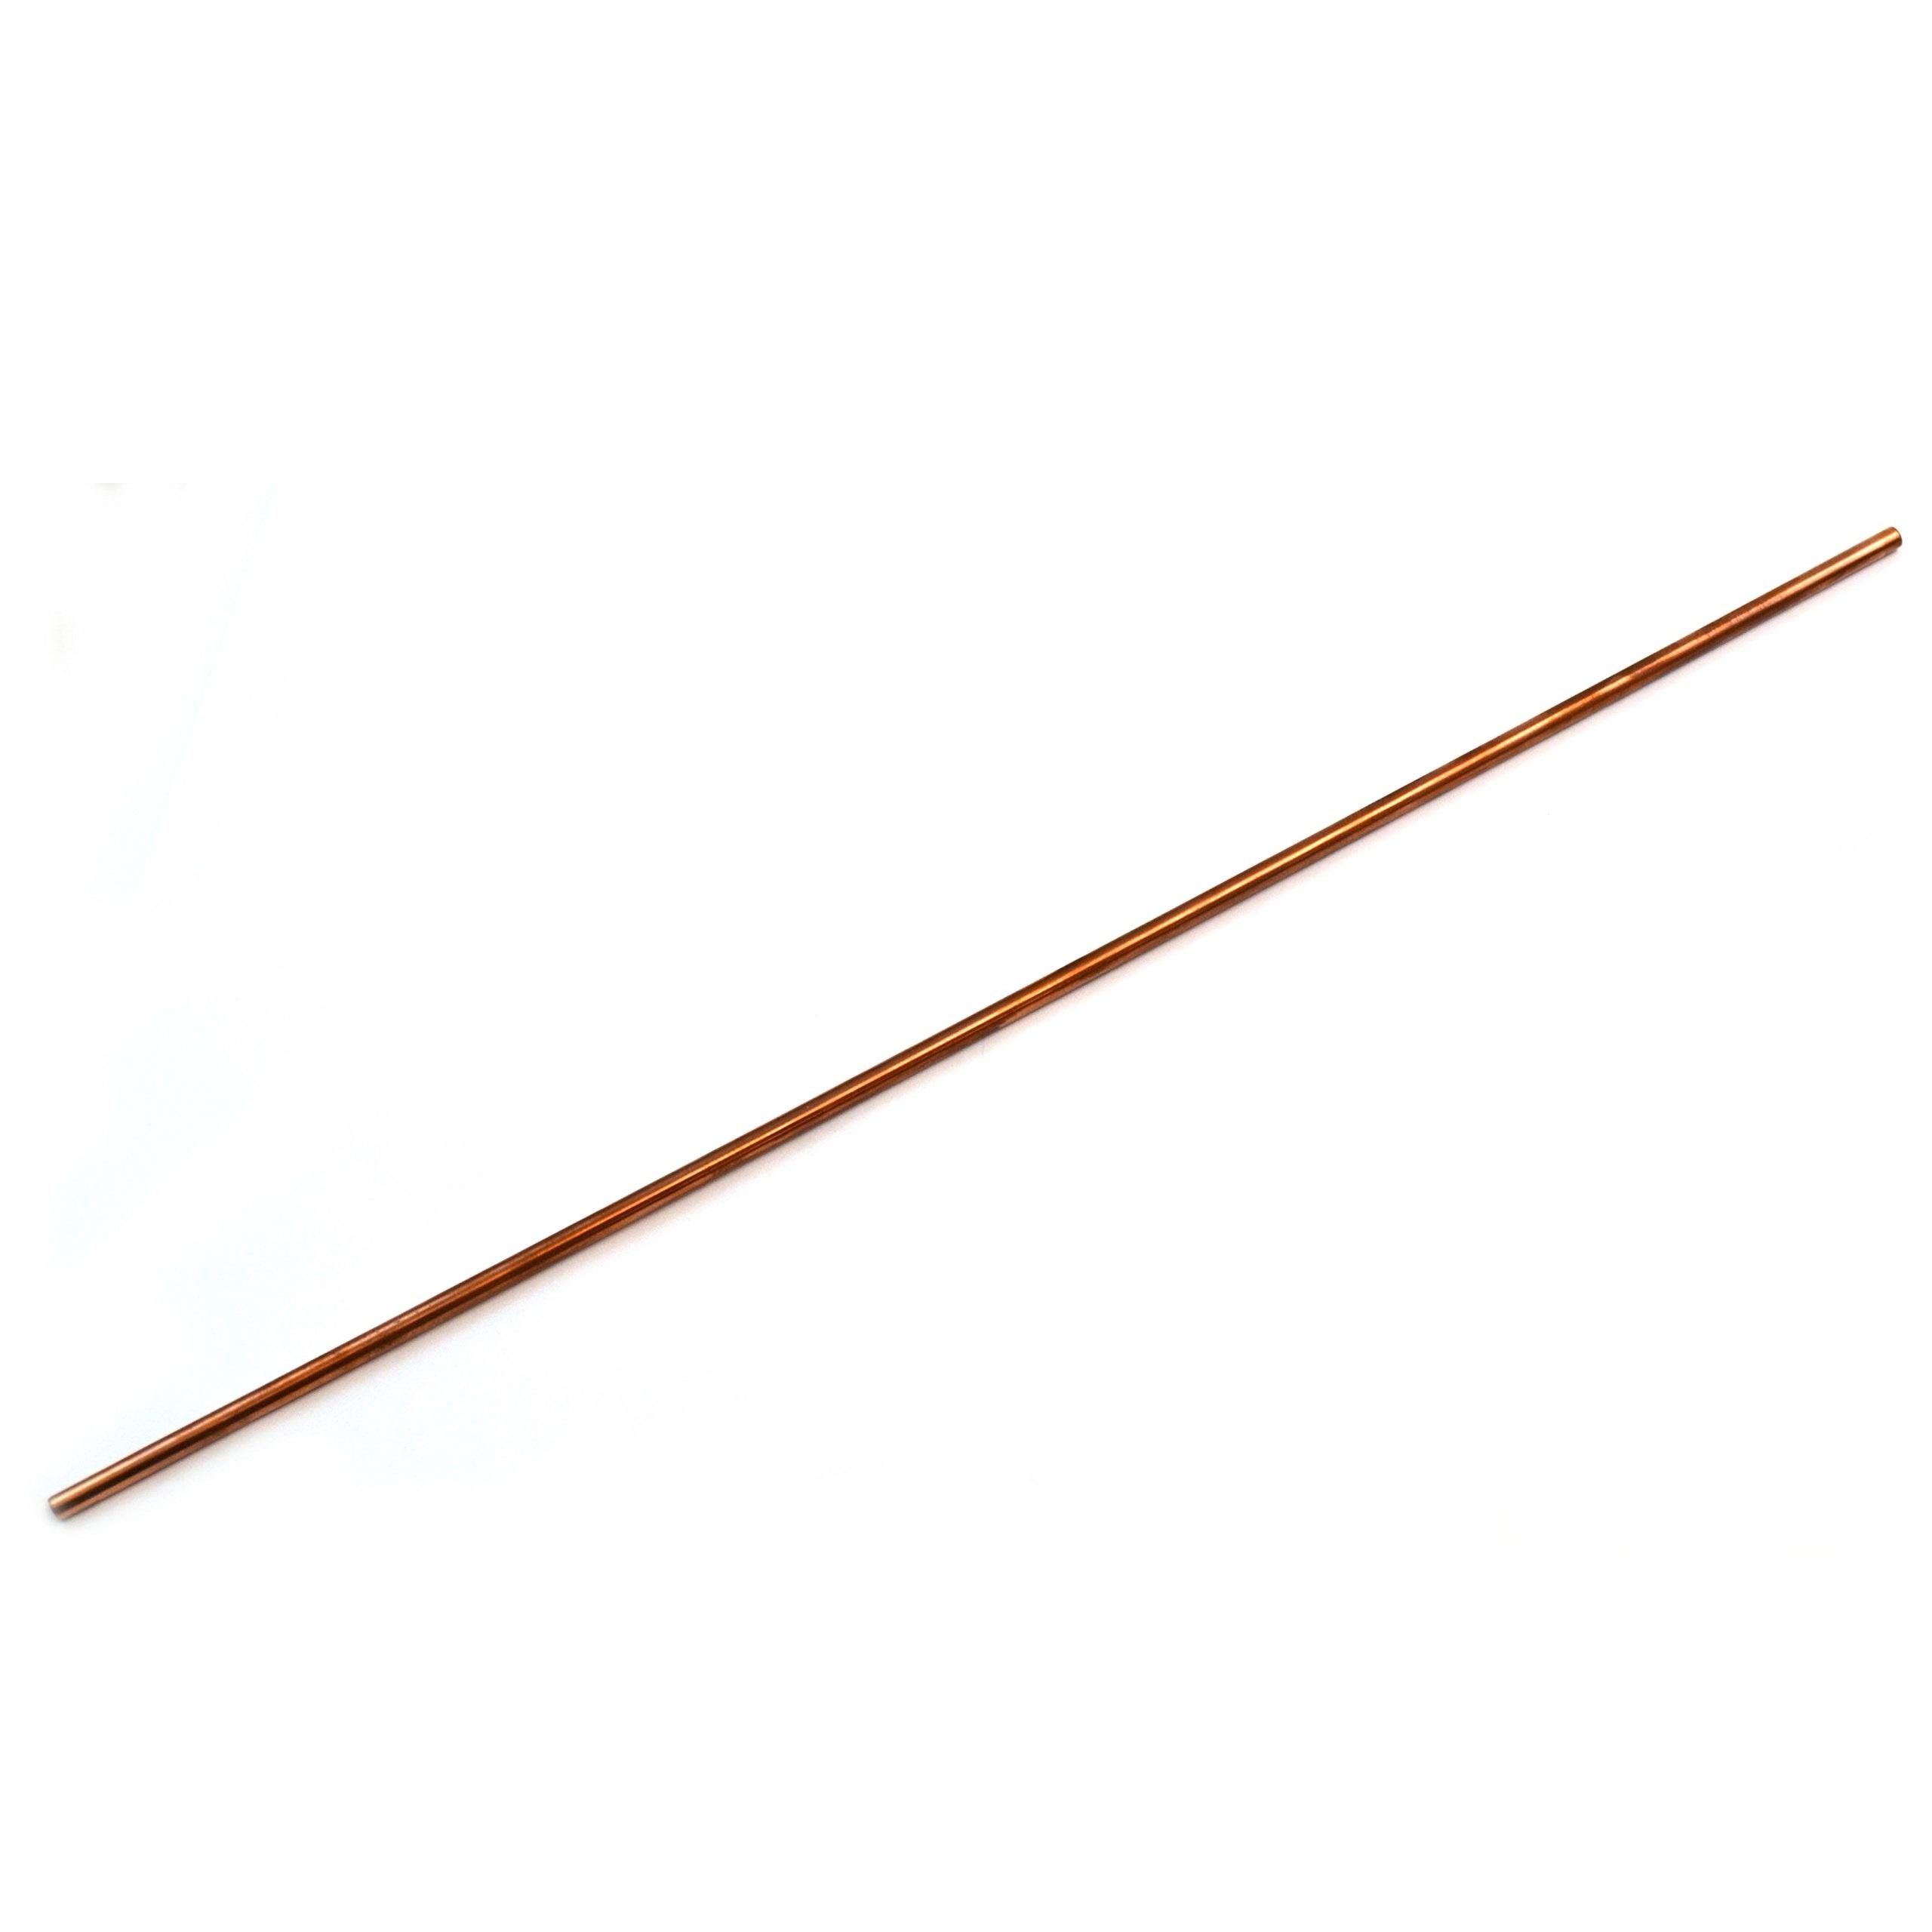 Copper Linear Expansion Rod